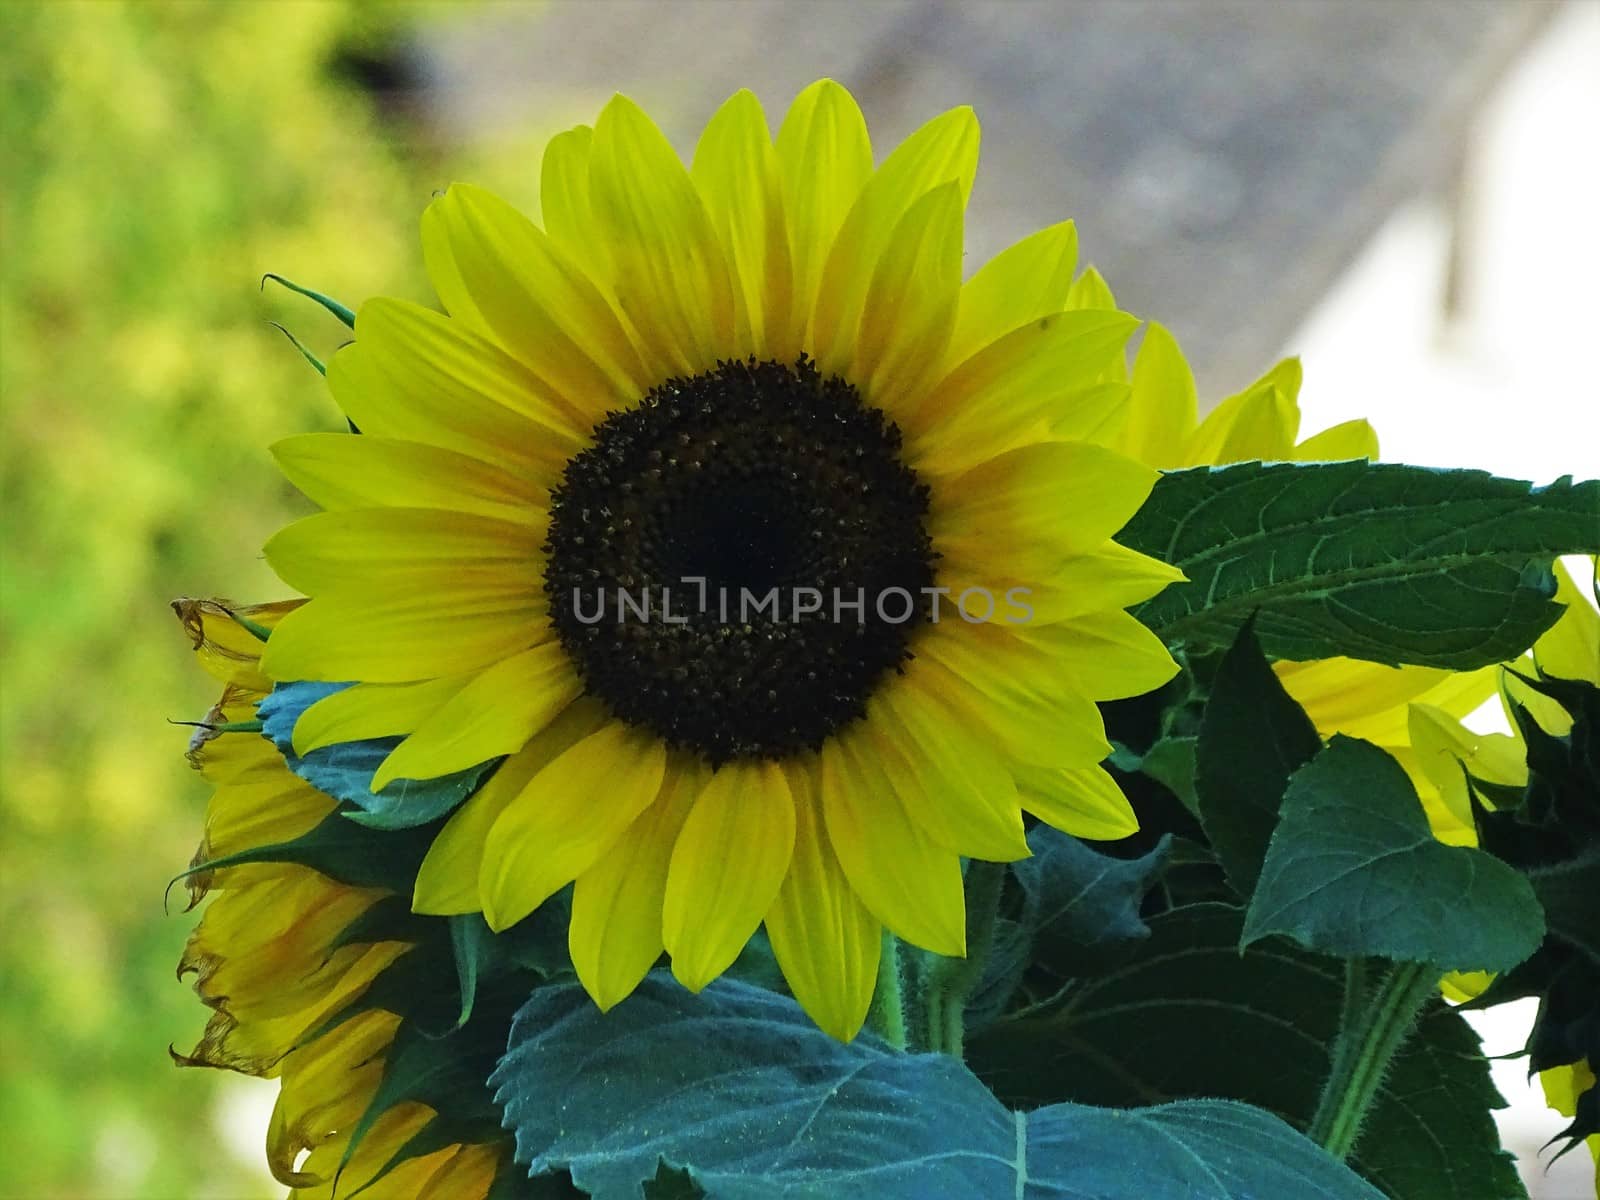 Fully blooming beautiful sunflower blossom spotted in Germany